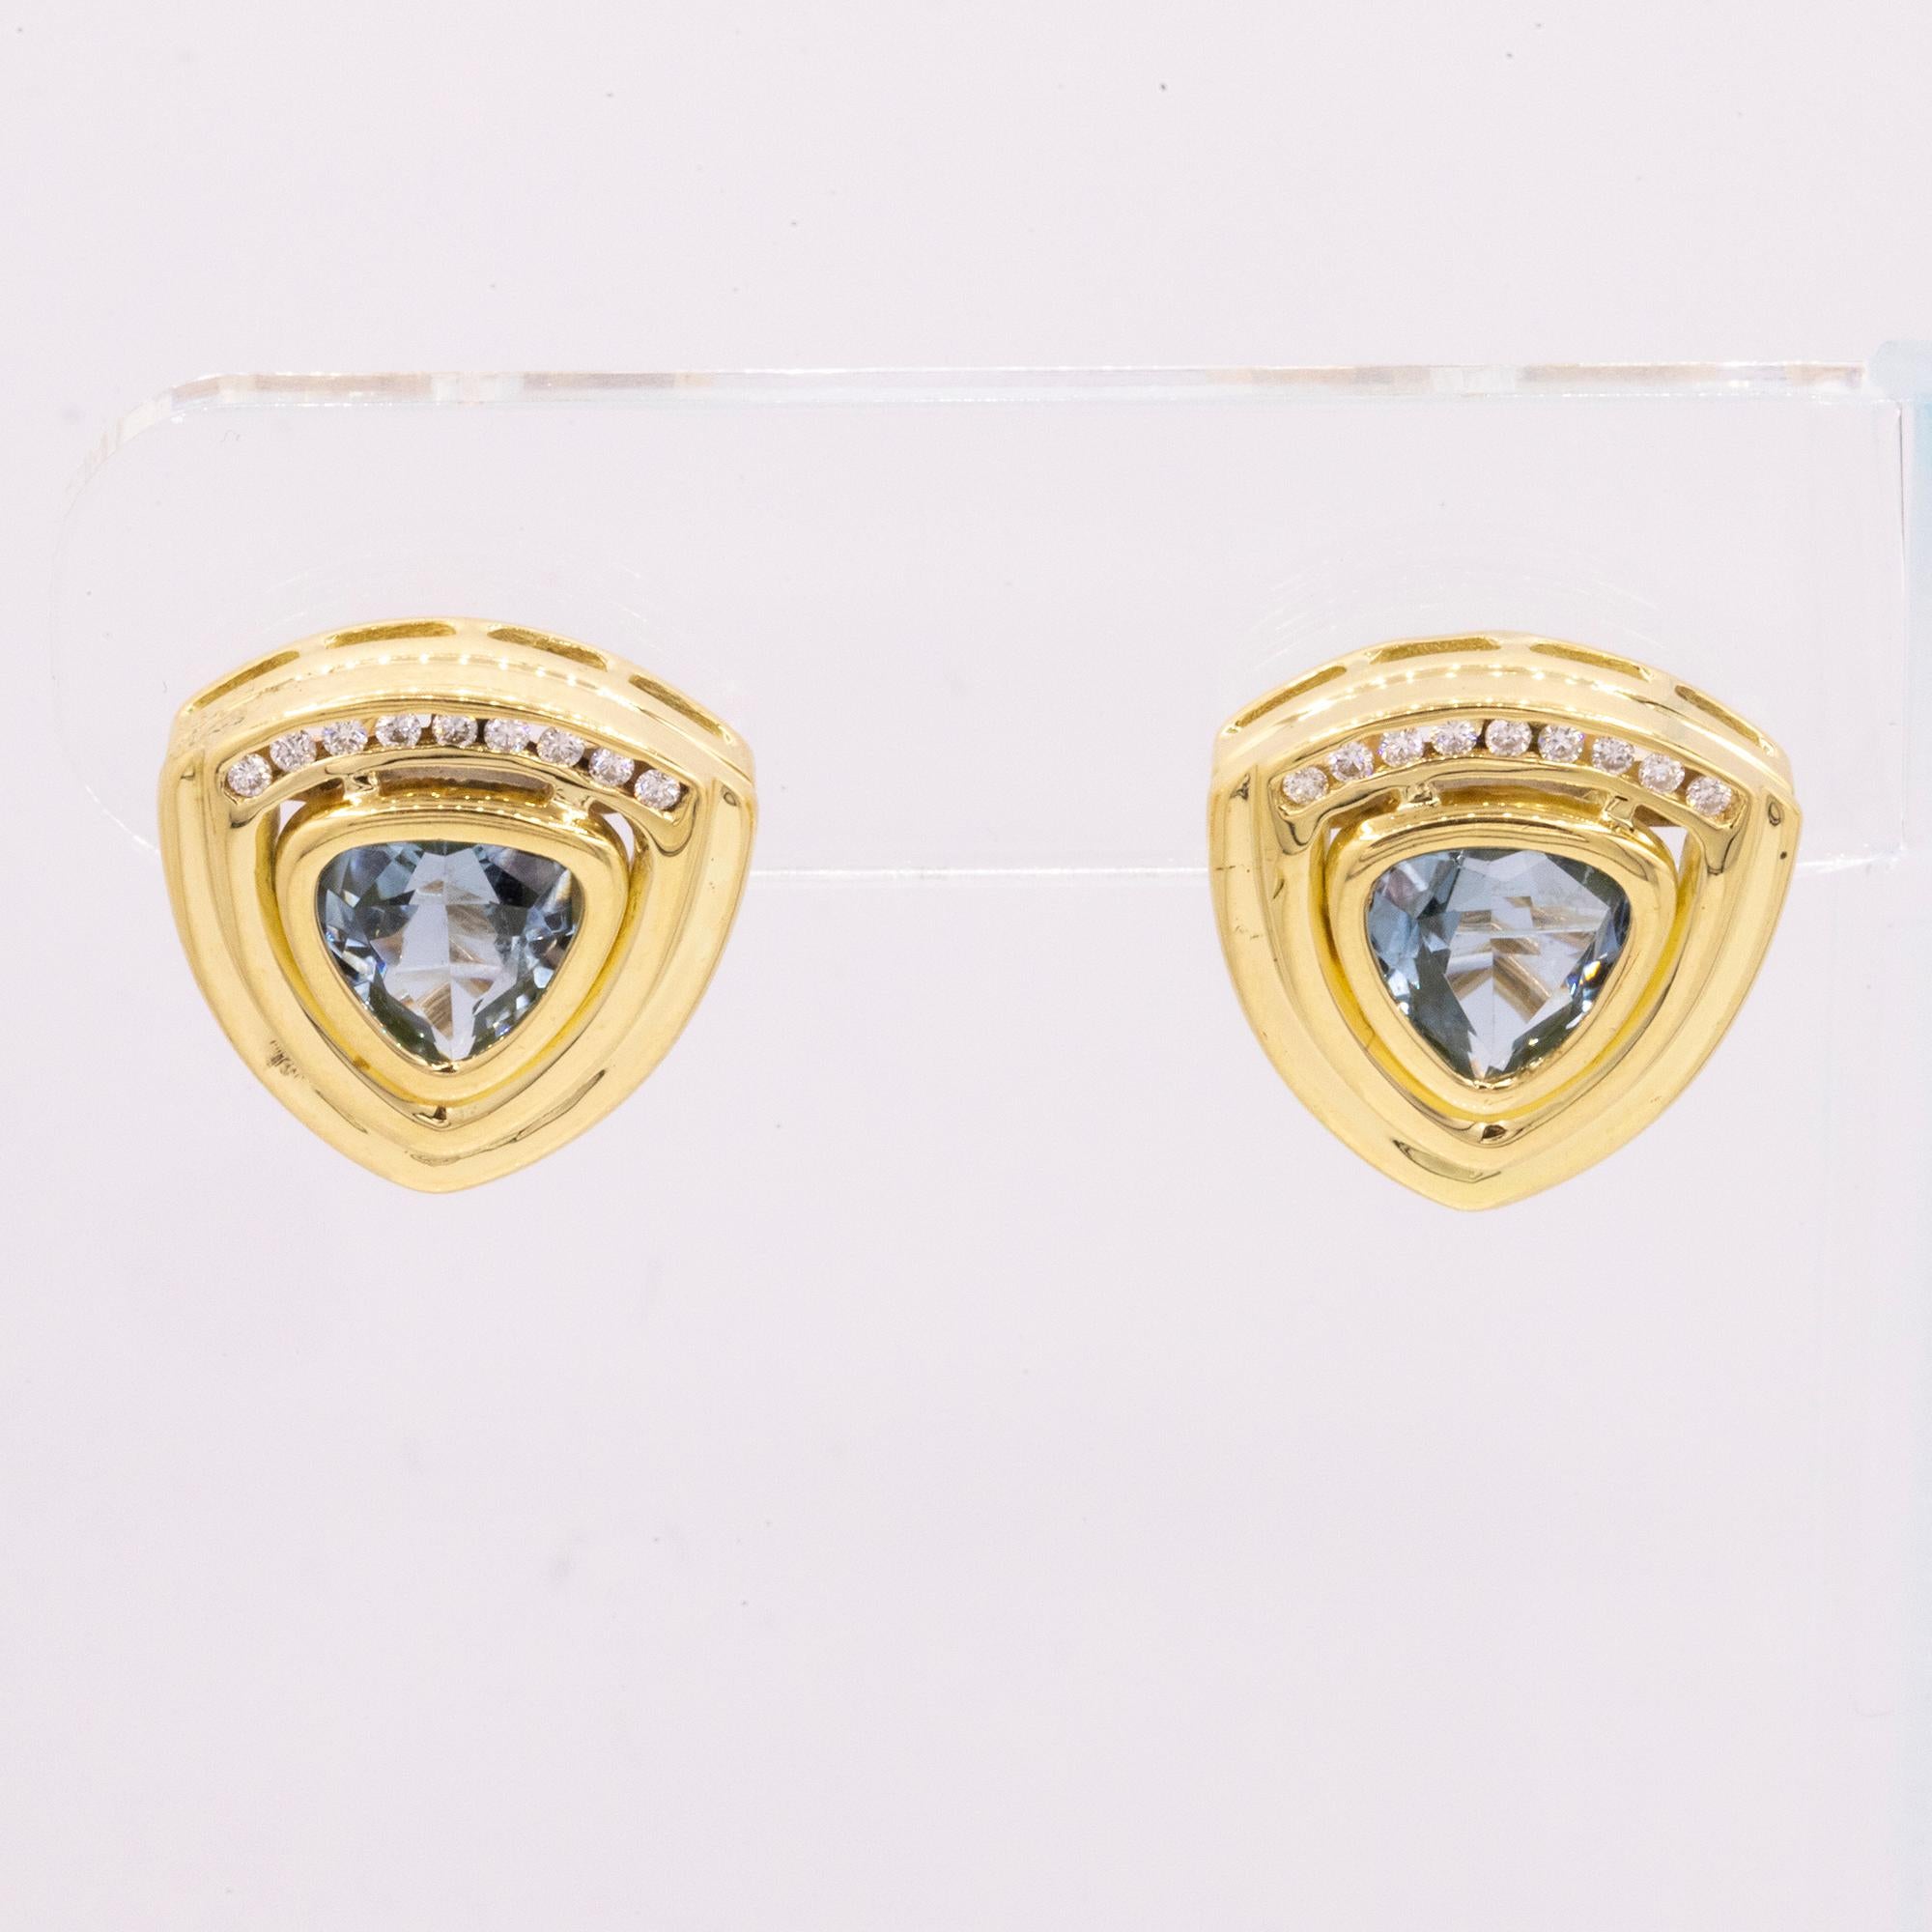 14 Karat Yellow Gold Earrings with Trillion cut Blue Topaz gemstones. Accented with 20 Round Brilliant cut Diamonds. These earrings weigh 7.11 dwt. Fun and easy to wear everyday earrings! 